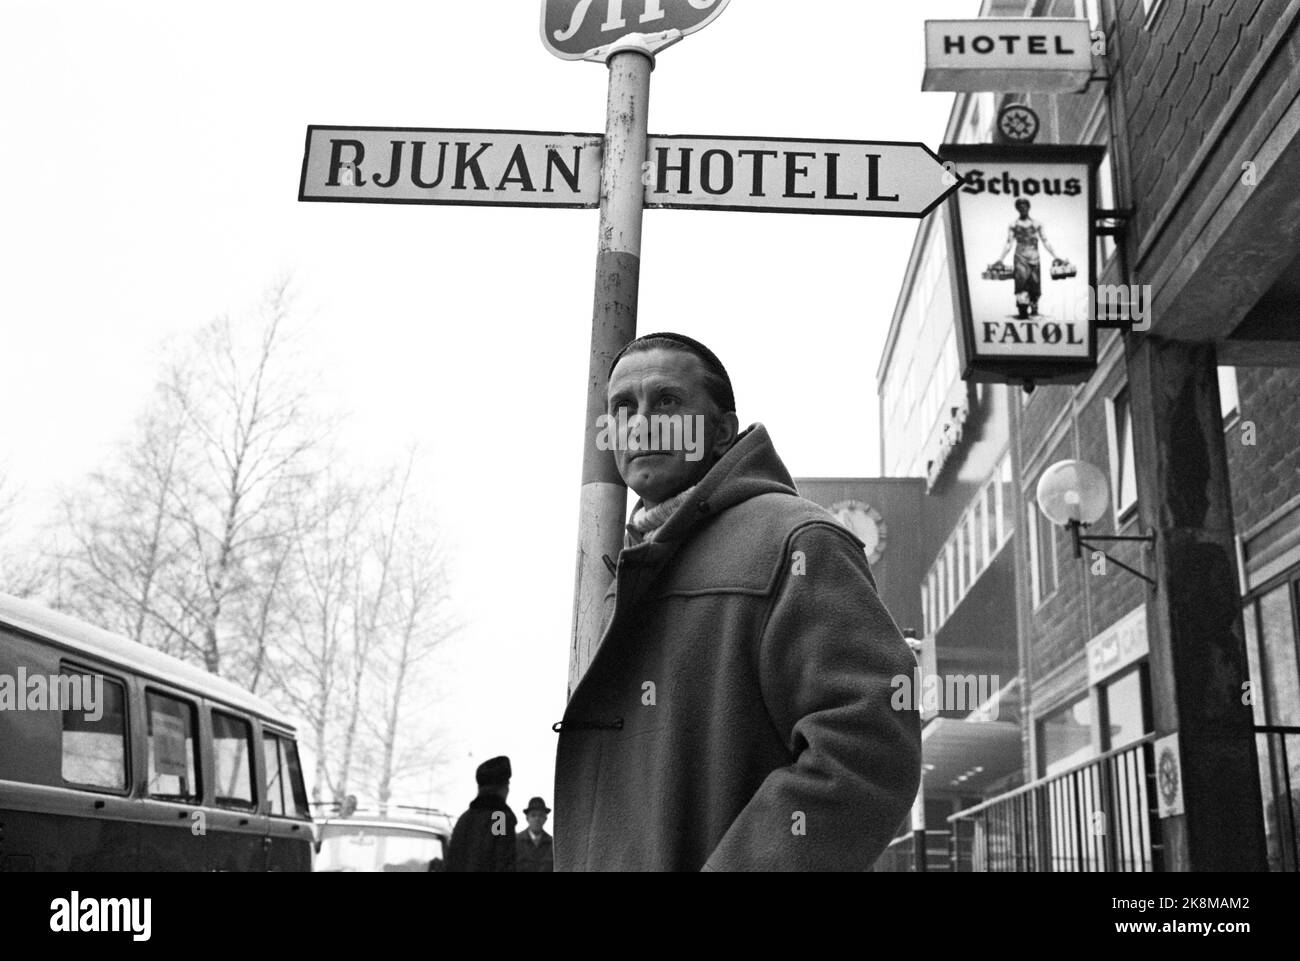 Rjukan January 1965 Film recording of 'Heroes from Telemark' at Rjukan. About the heavy water saboteurs from Kompani Linge. Sabotage towards Vemork power station. The British company Benton Film poses with a staff of 120. Hot number one is American actor Kirk Douglas. Here he stands outside Rjukan Hotel. Signed with Schous Fat beer. Photo: Sverre A. Børretzen / Current / NTB Stock Photo